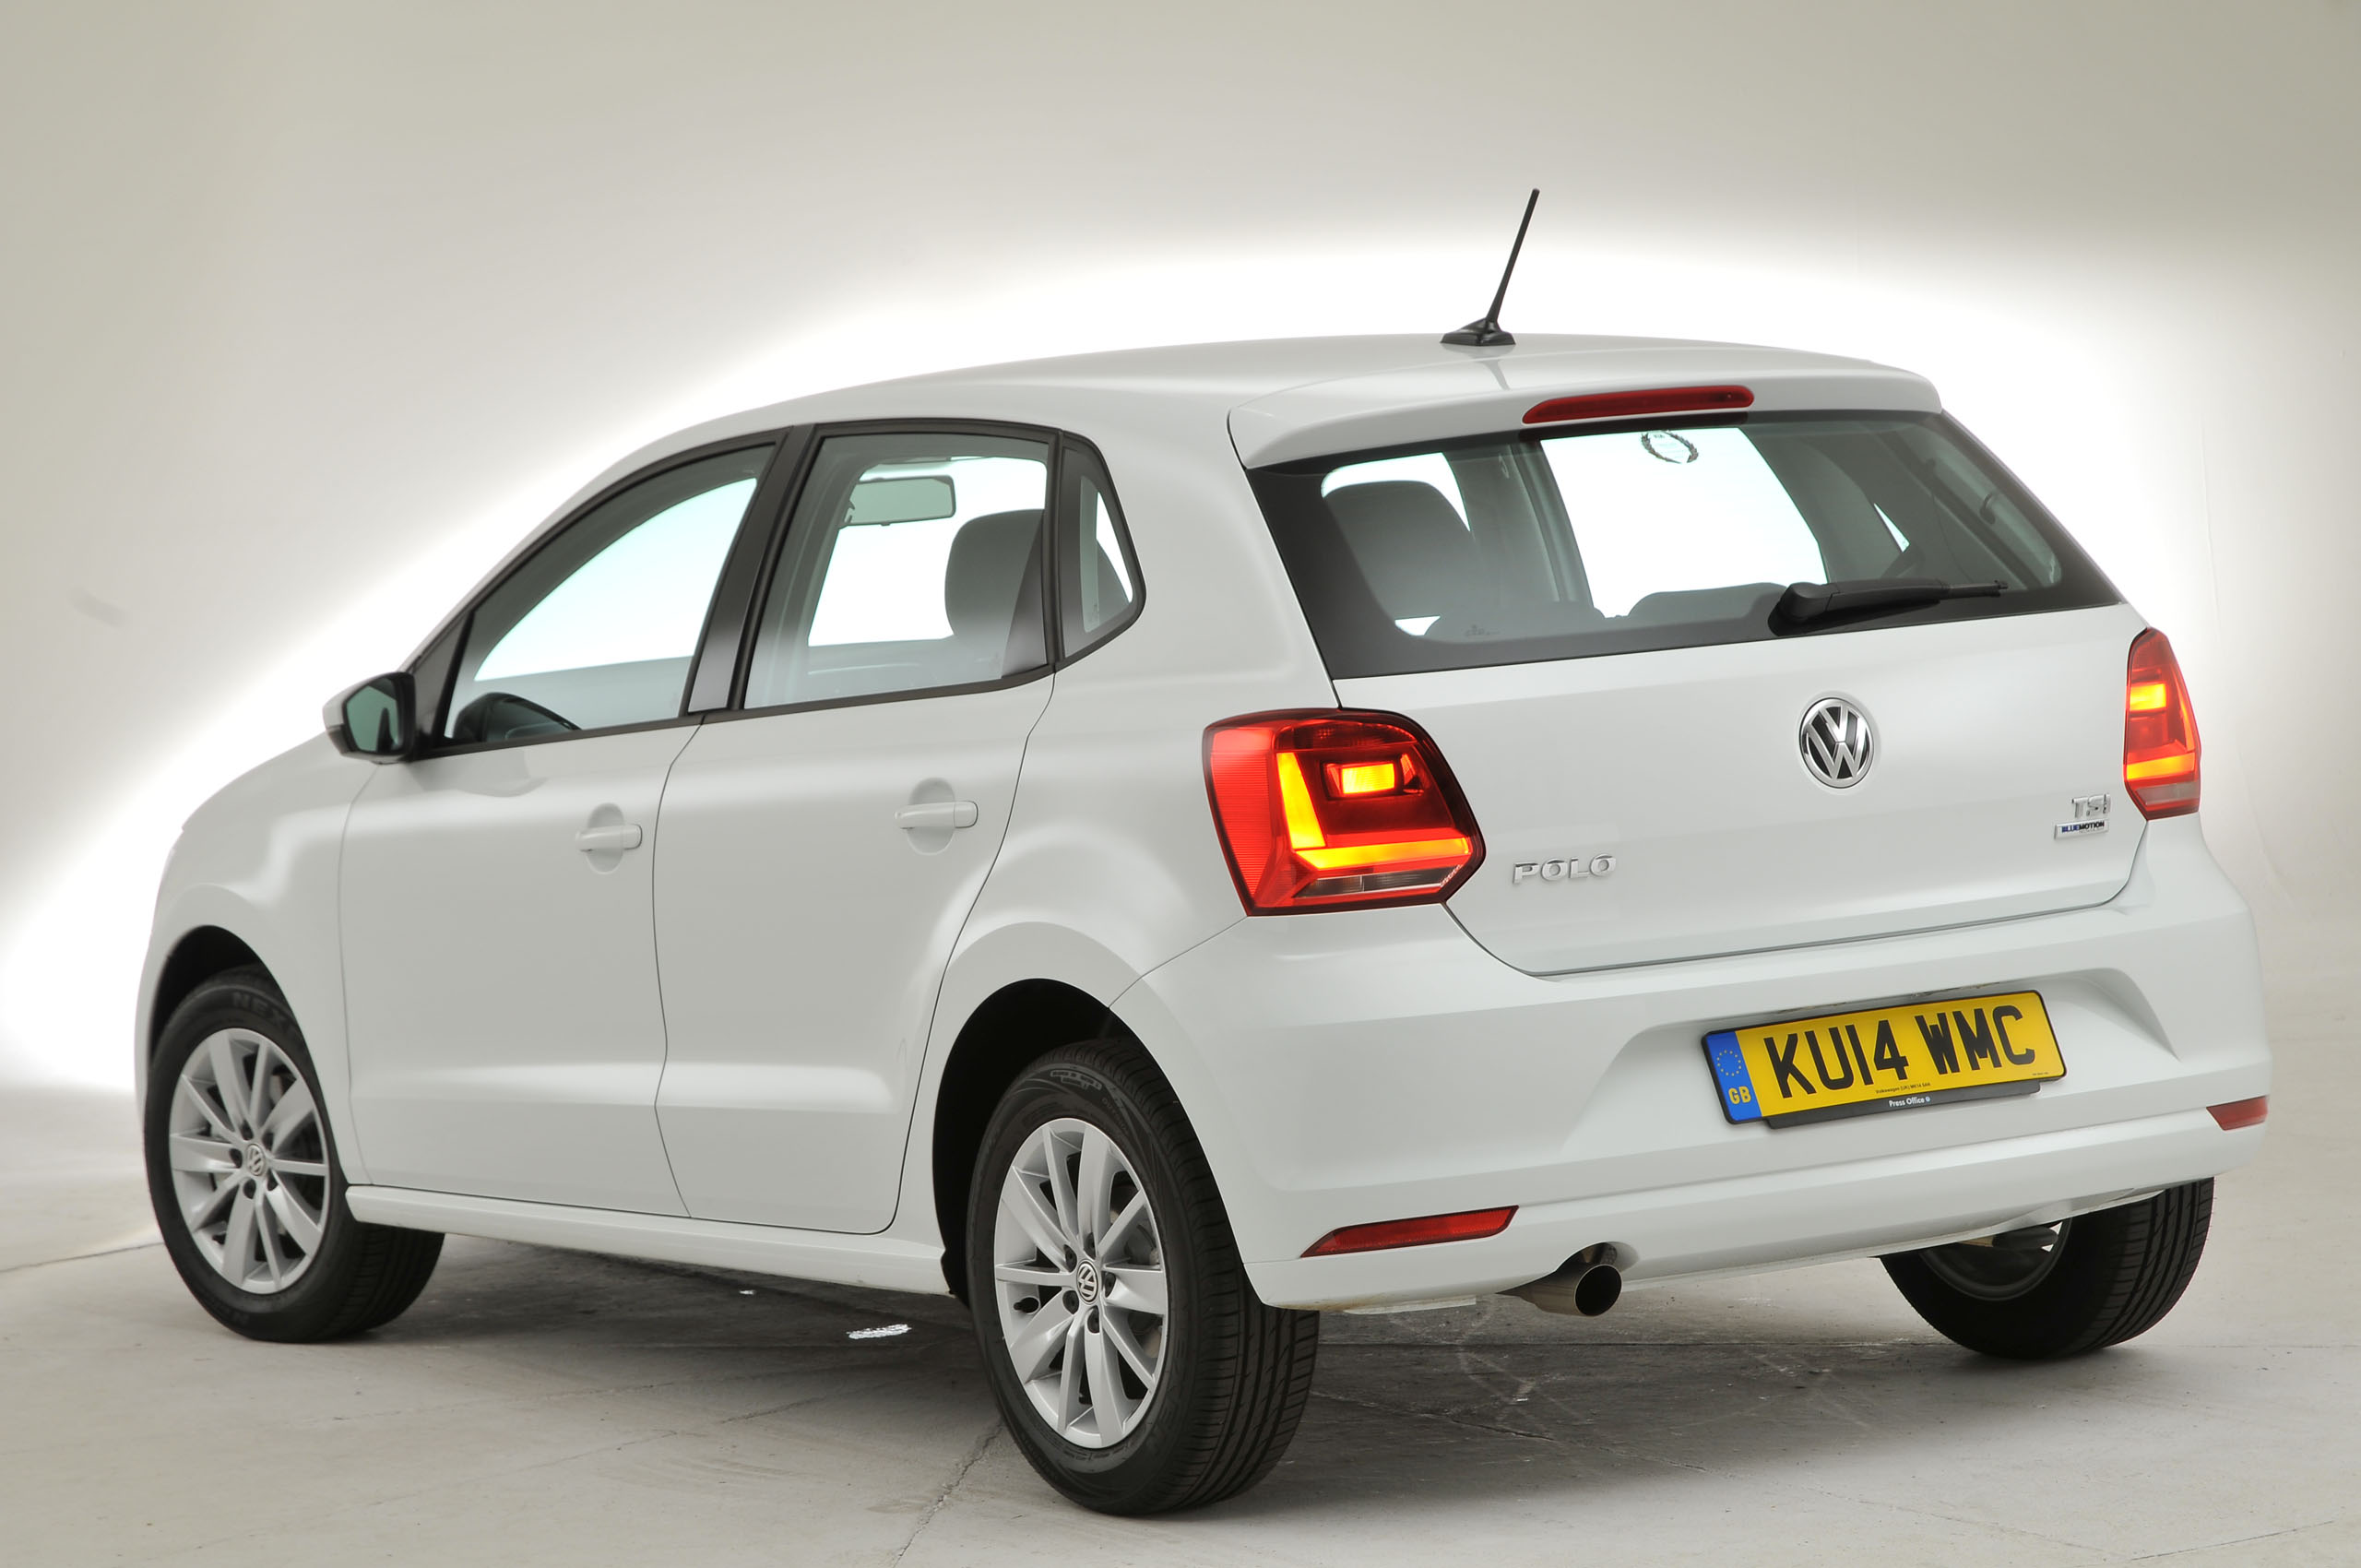 Used Volkswagen Polo 2009-2017 review